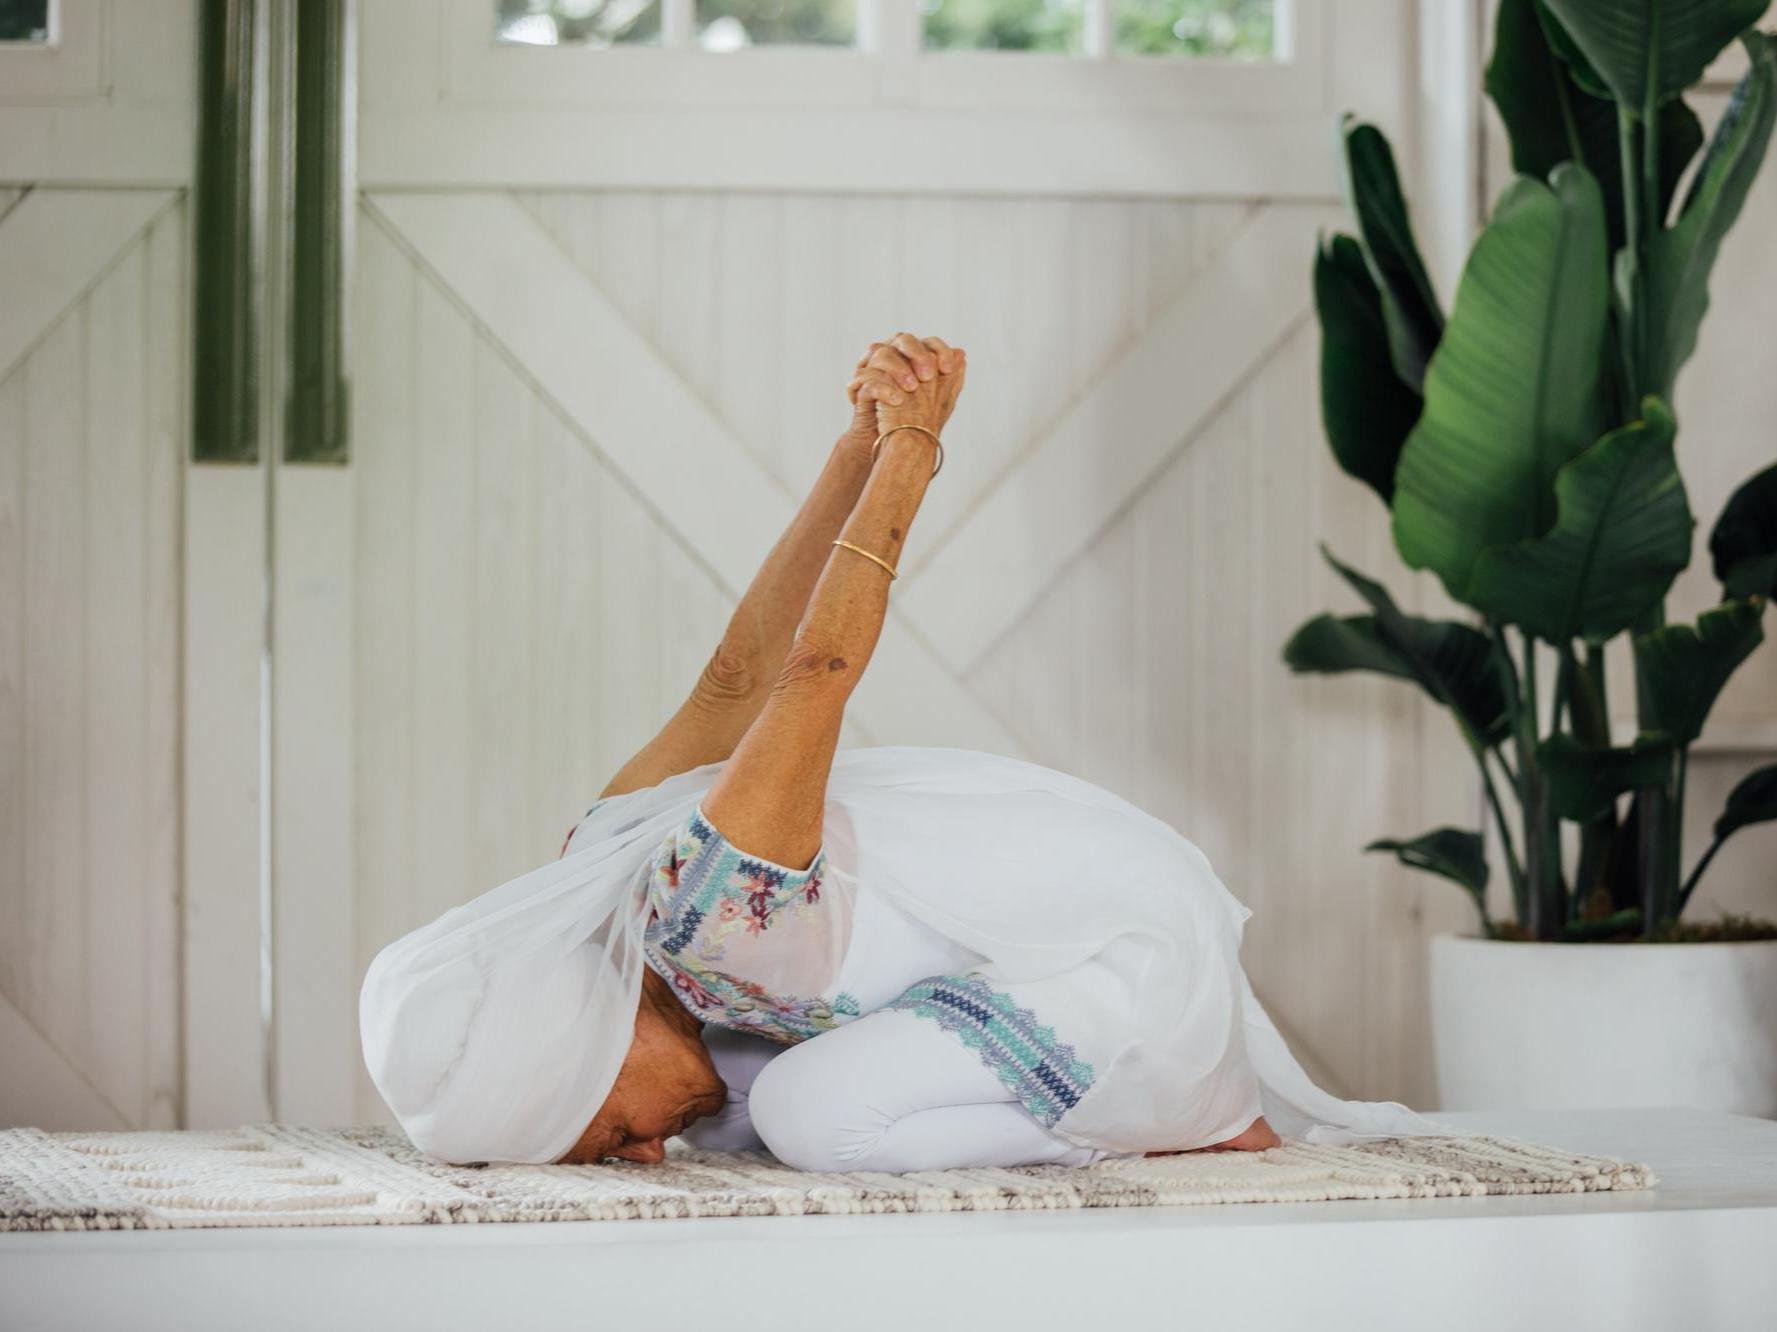 8 Child's Pose Variations to Deepen the Stretch — Alo Moves